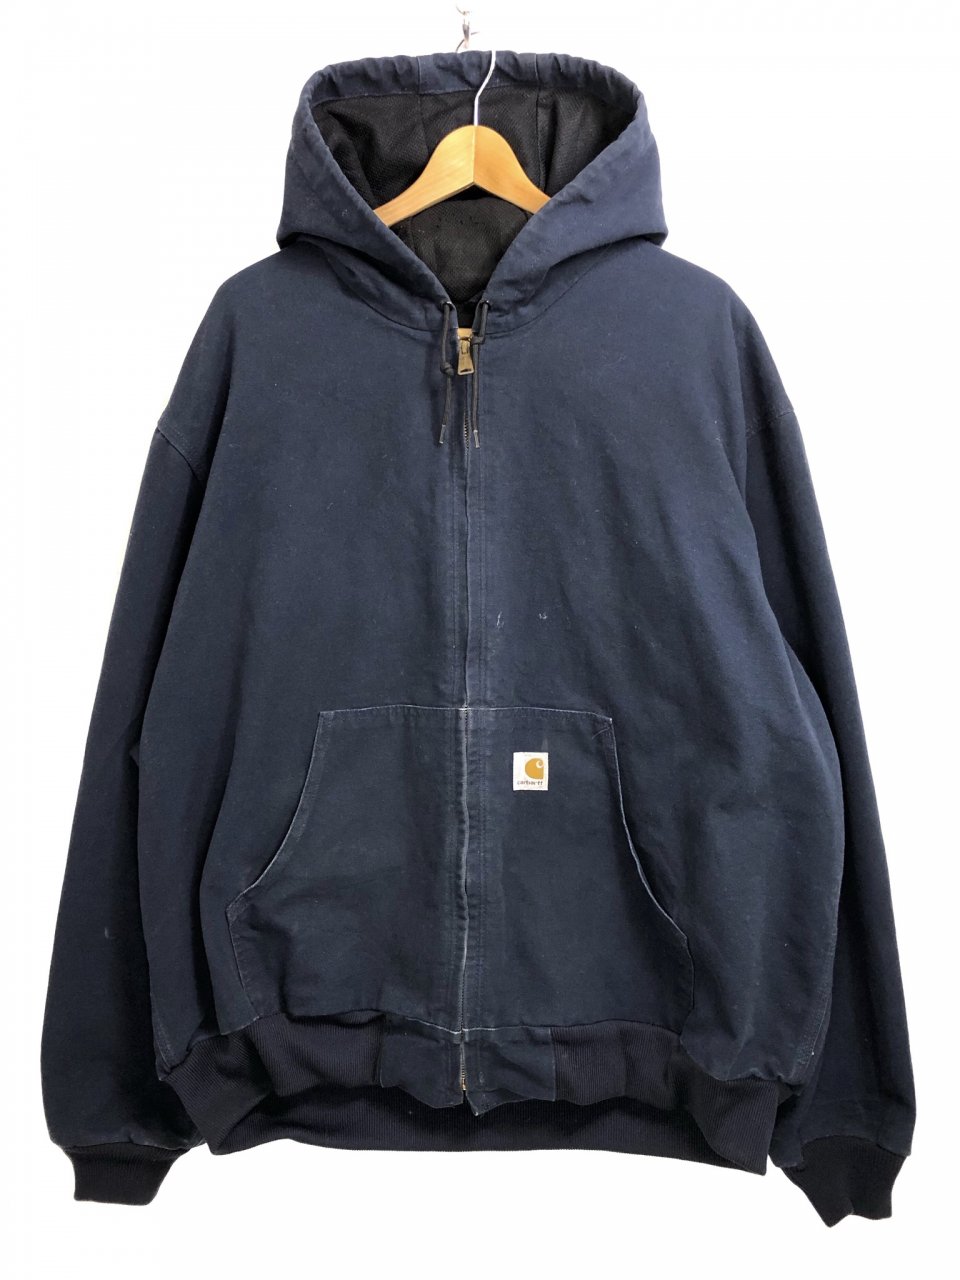 USA製 Carhartt Thermal Lined Active Jacket 紺 2XL カーハート 